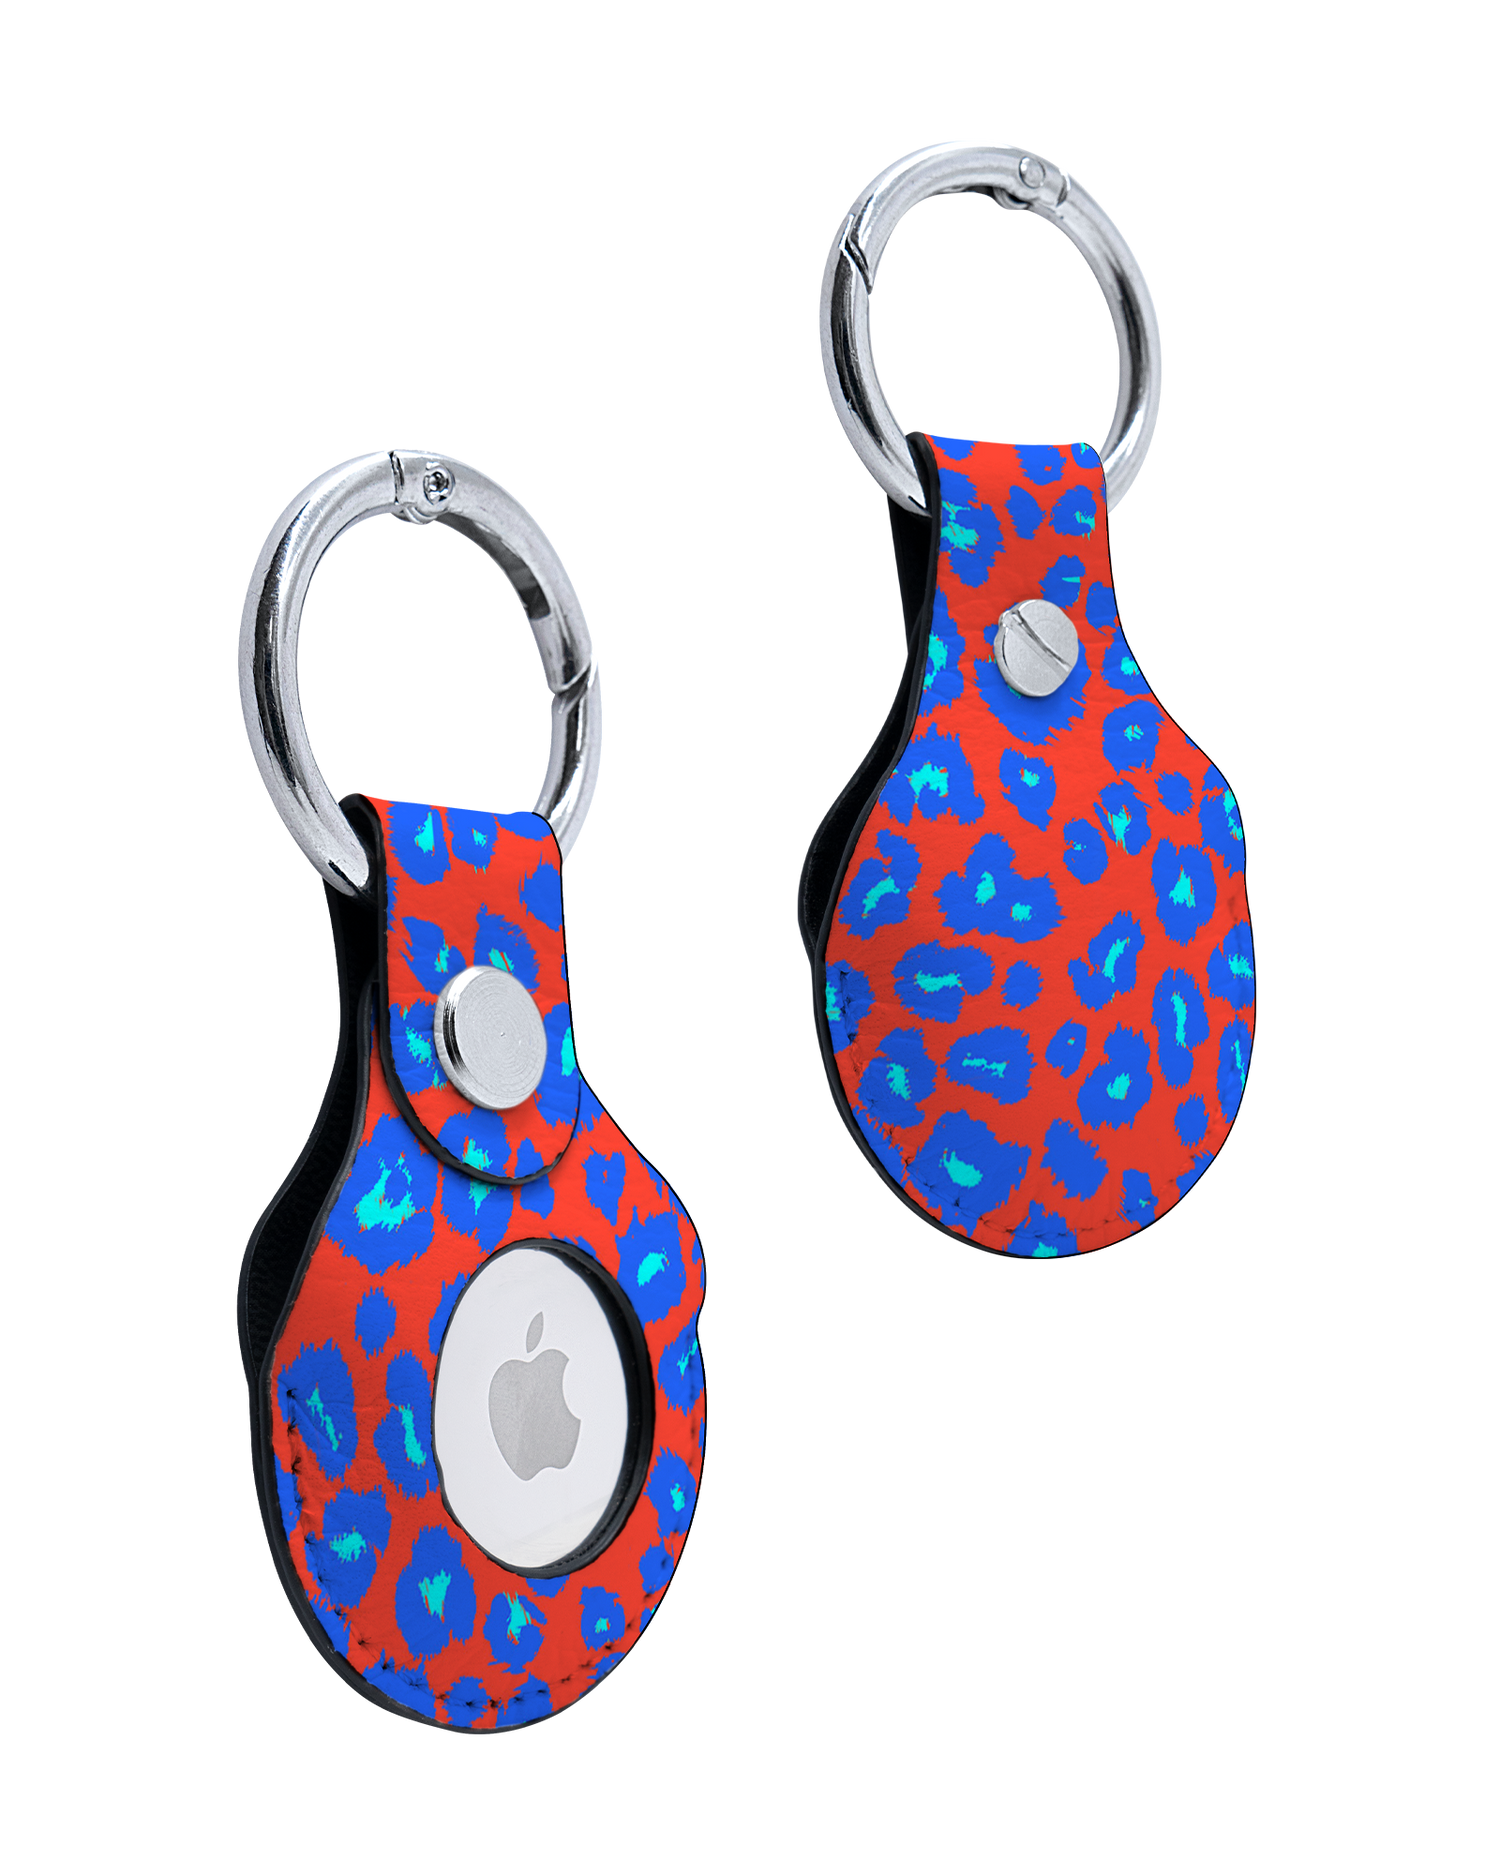 AirTag Holder with Bright Leopard Print Design: Front and Back